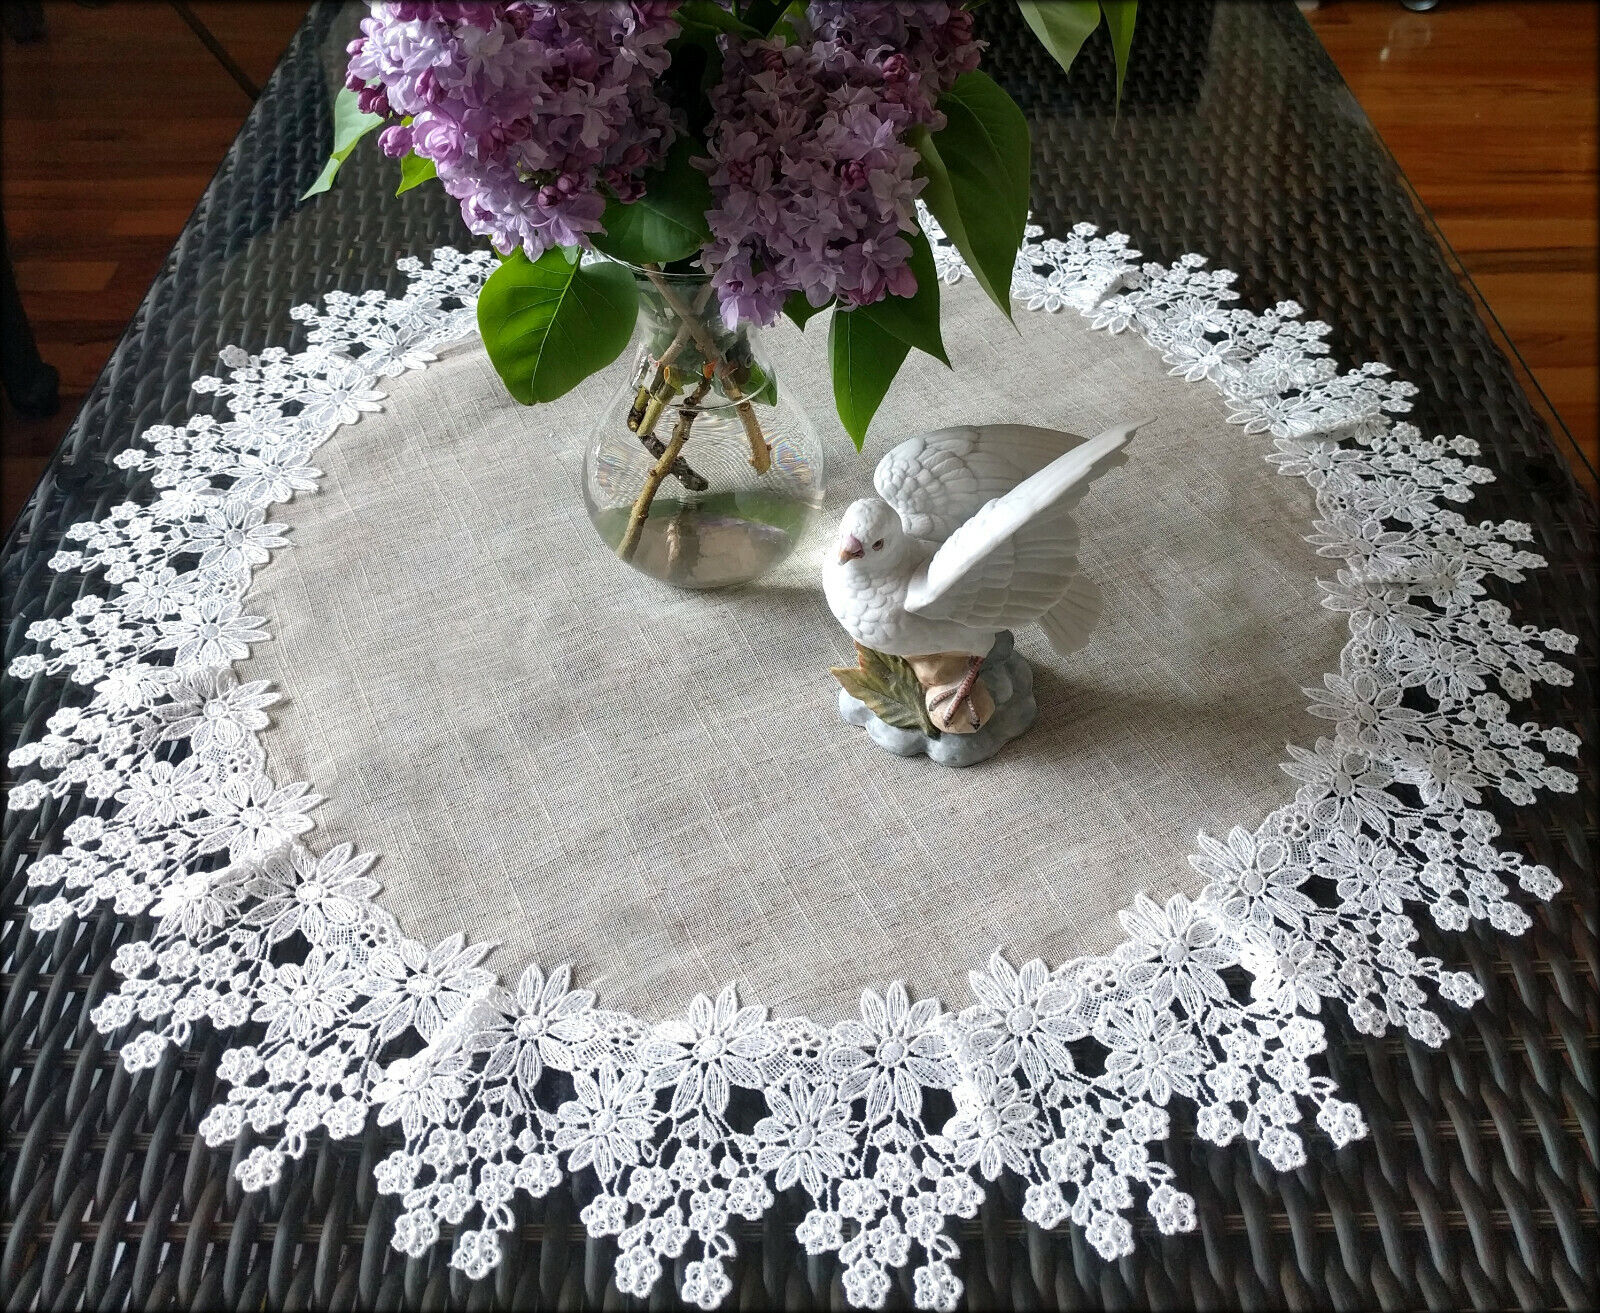 Doily 23 inch Flower Lace Table Topper Neutral Burlap Natural Floral Daisy 